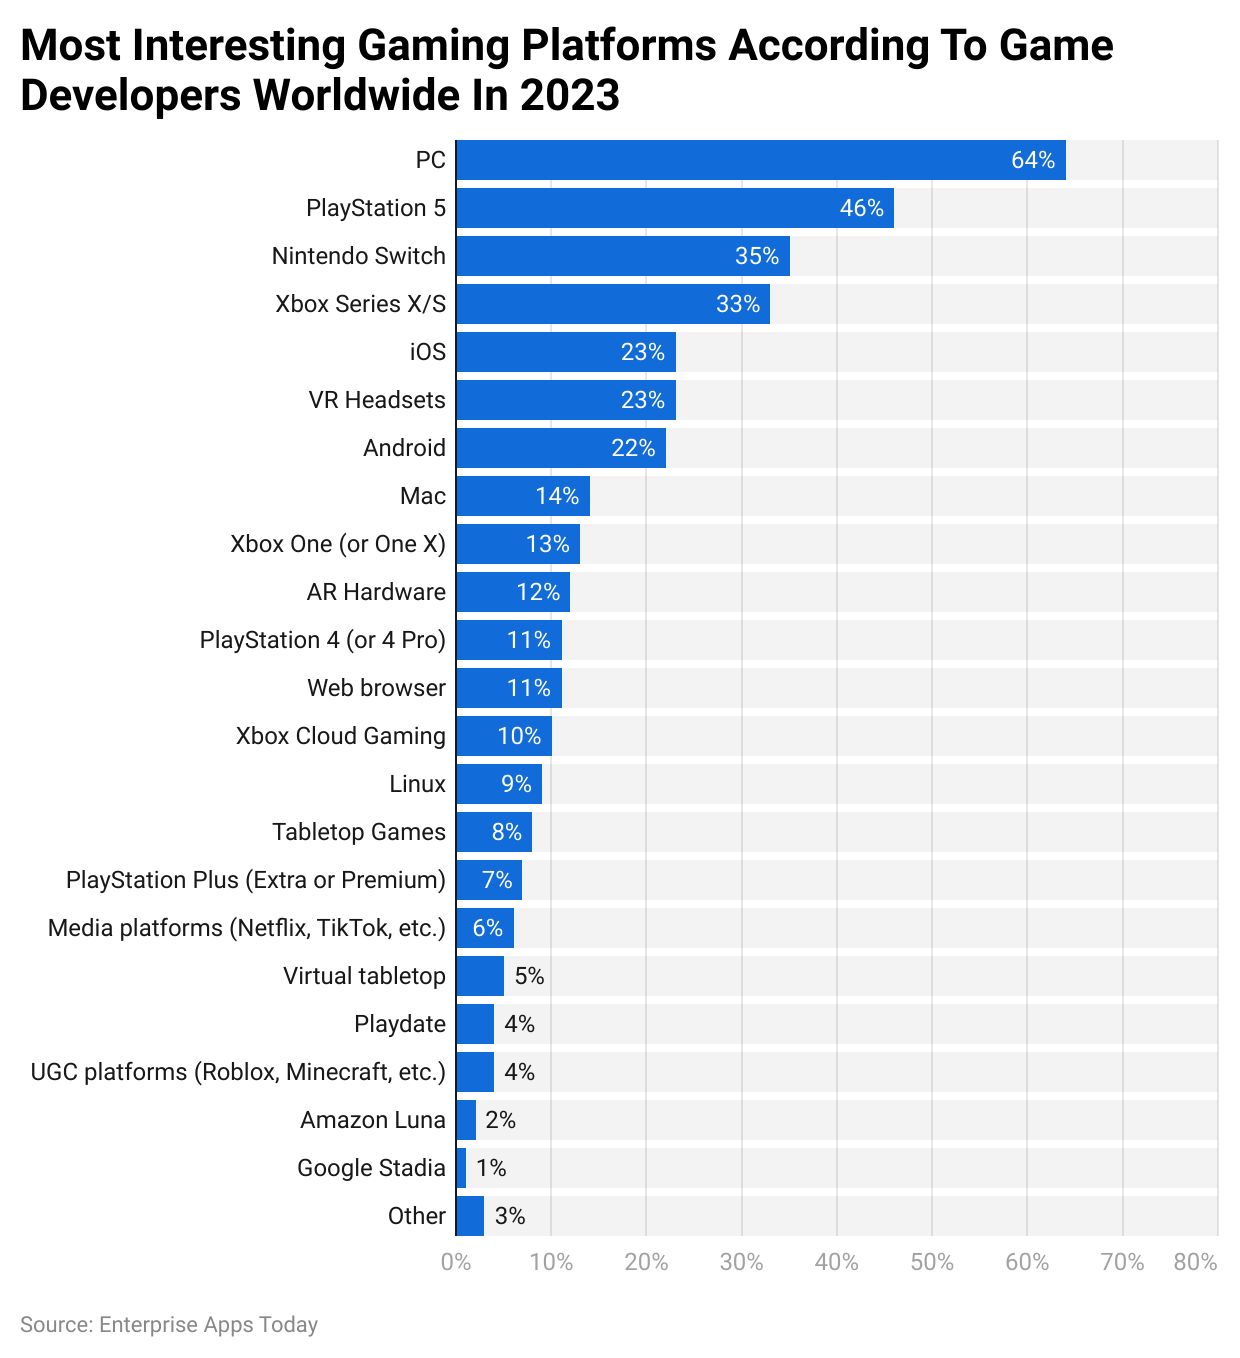 Most interesting gaming platforms according to game developers worldwide in 2023